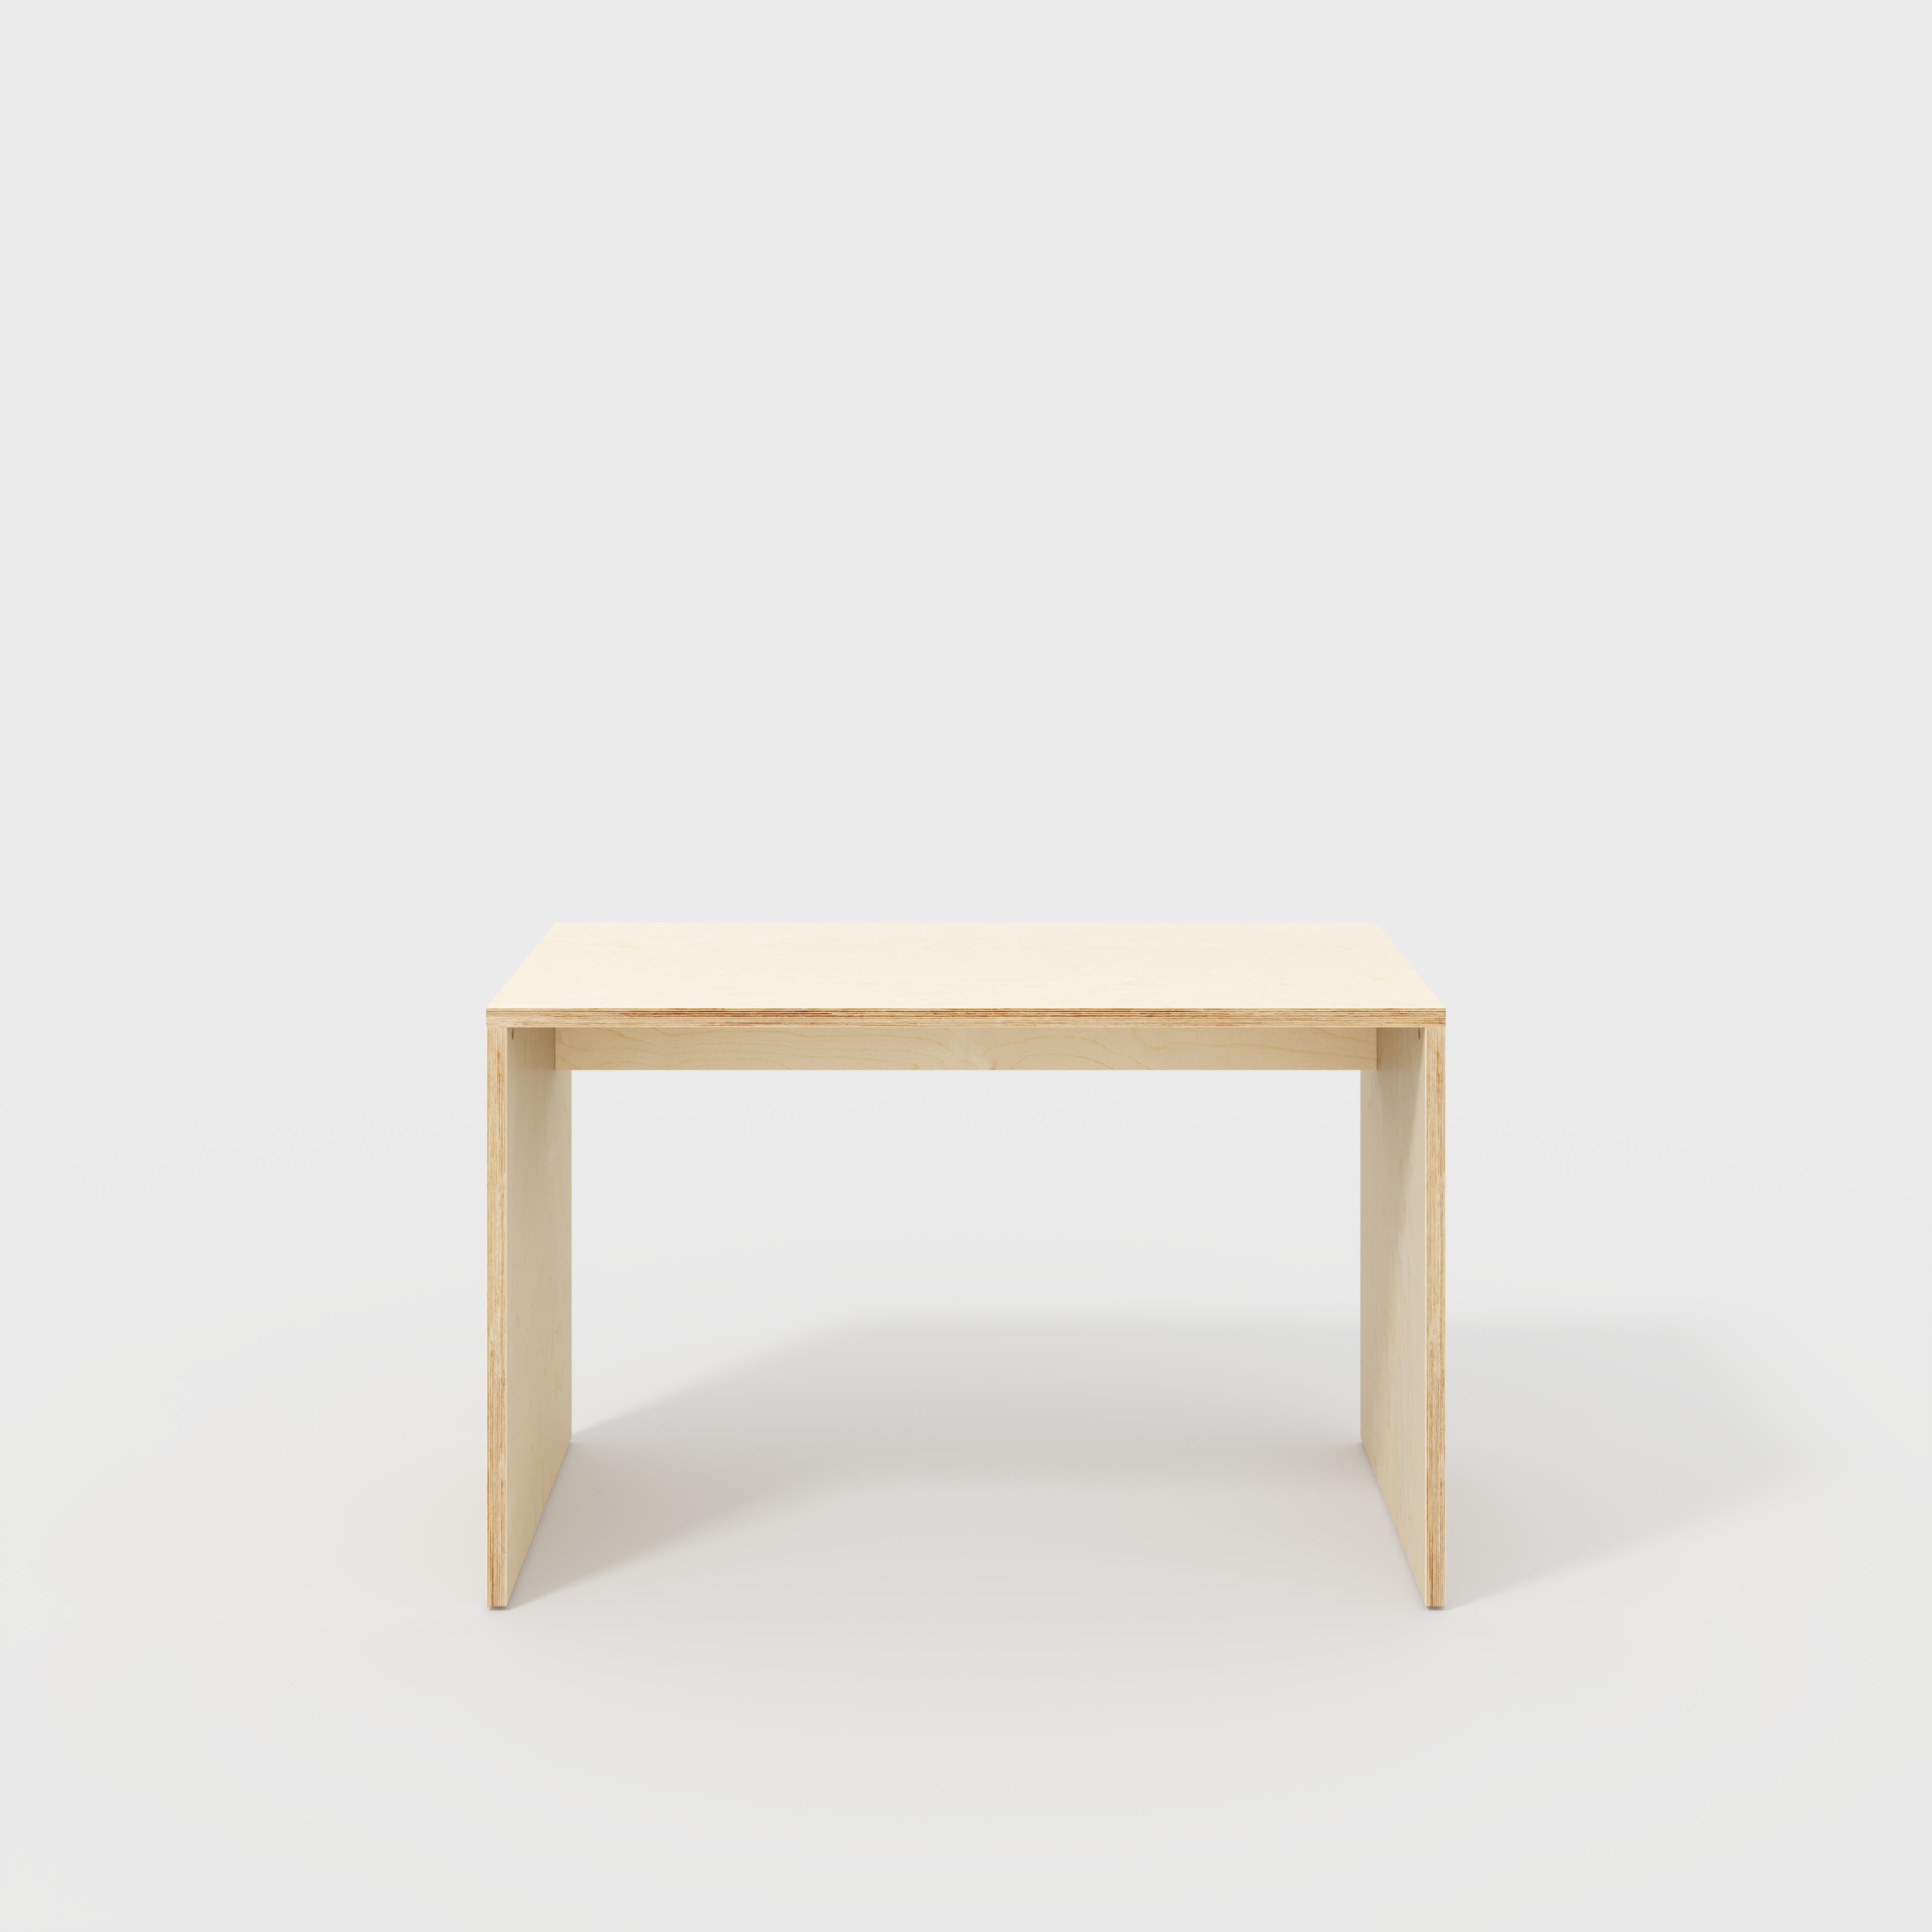 Desk with Solid Sides - Plywood Birch - 1200(w) x 600(d) x 750(h)